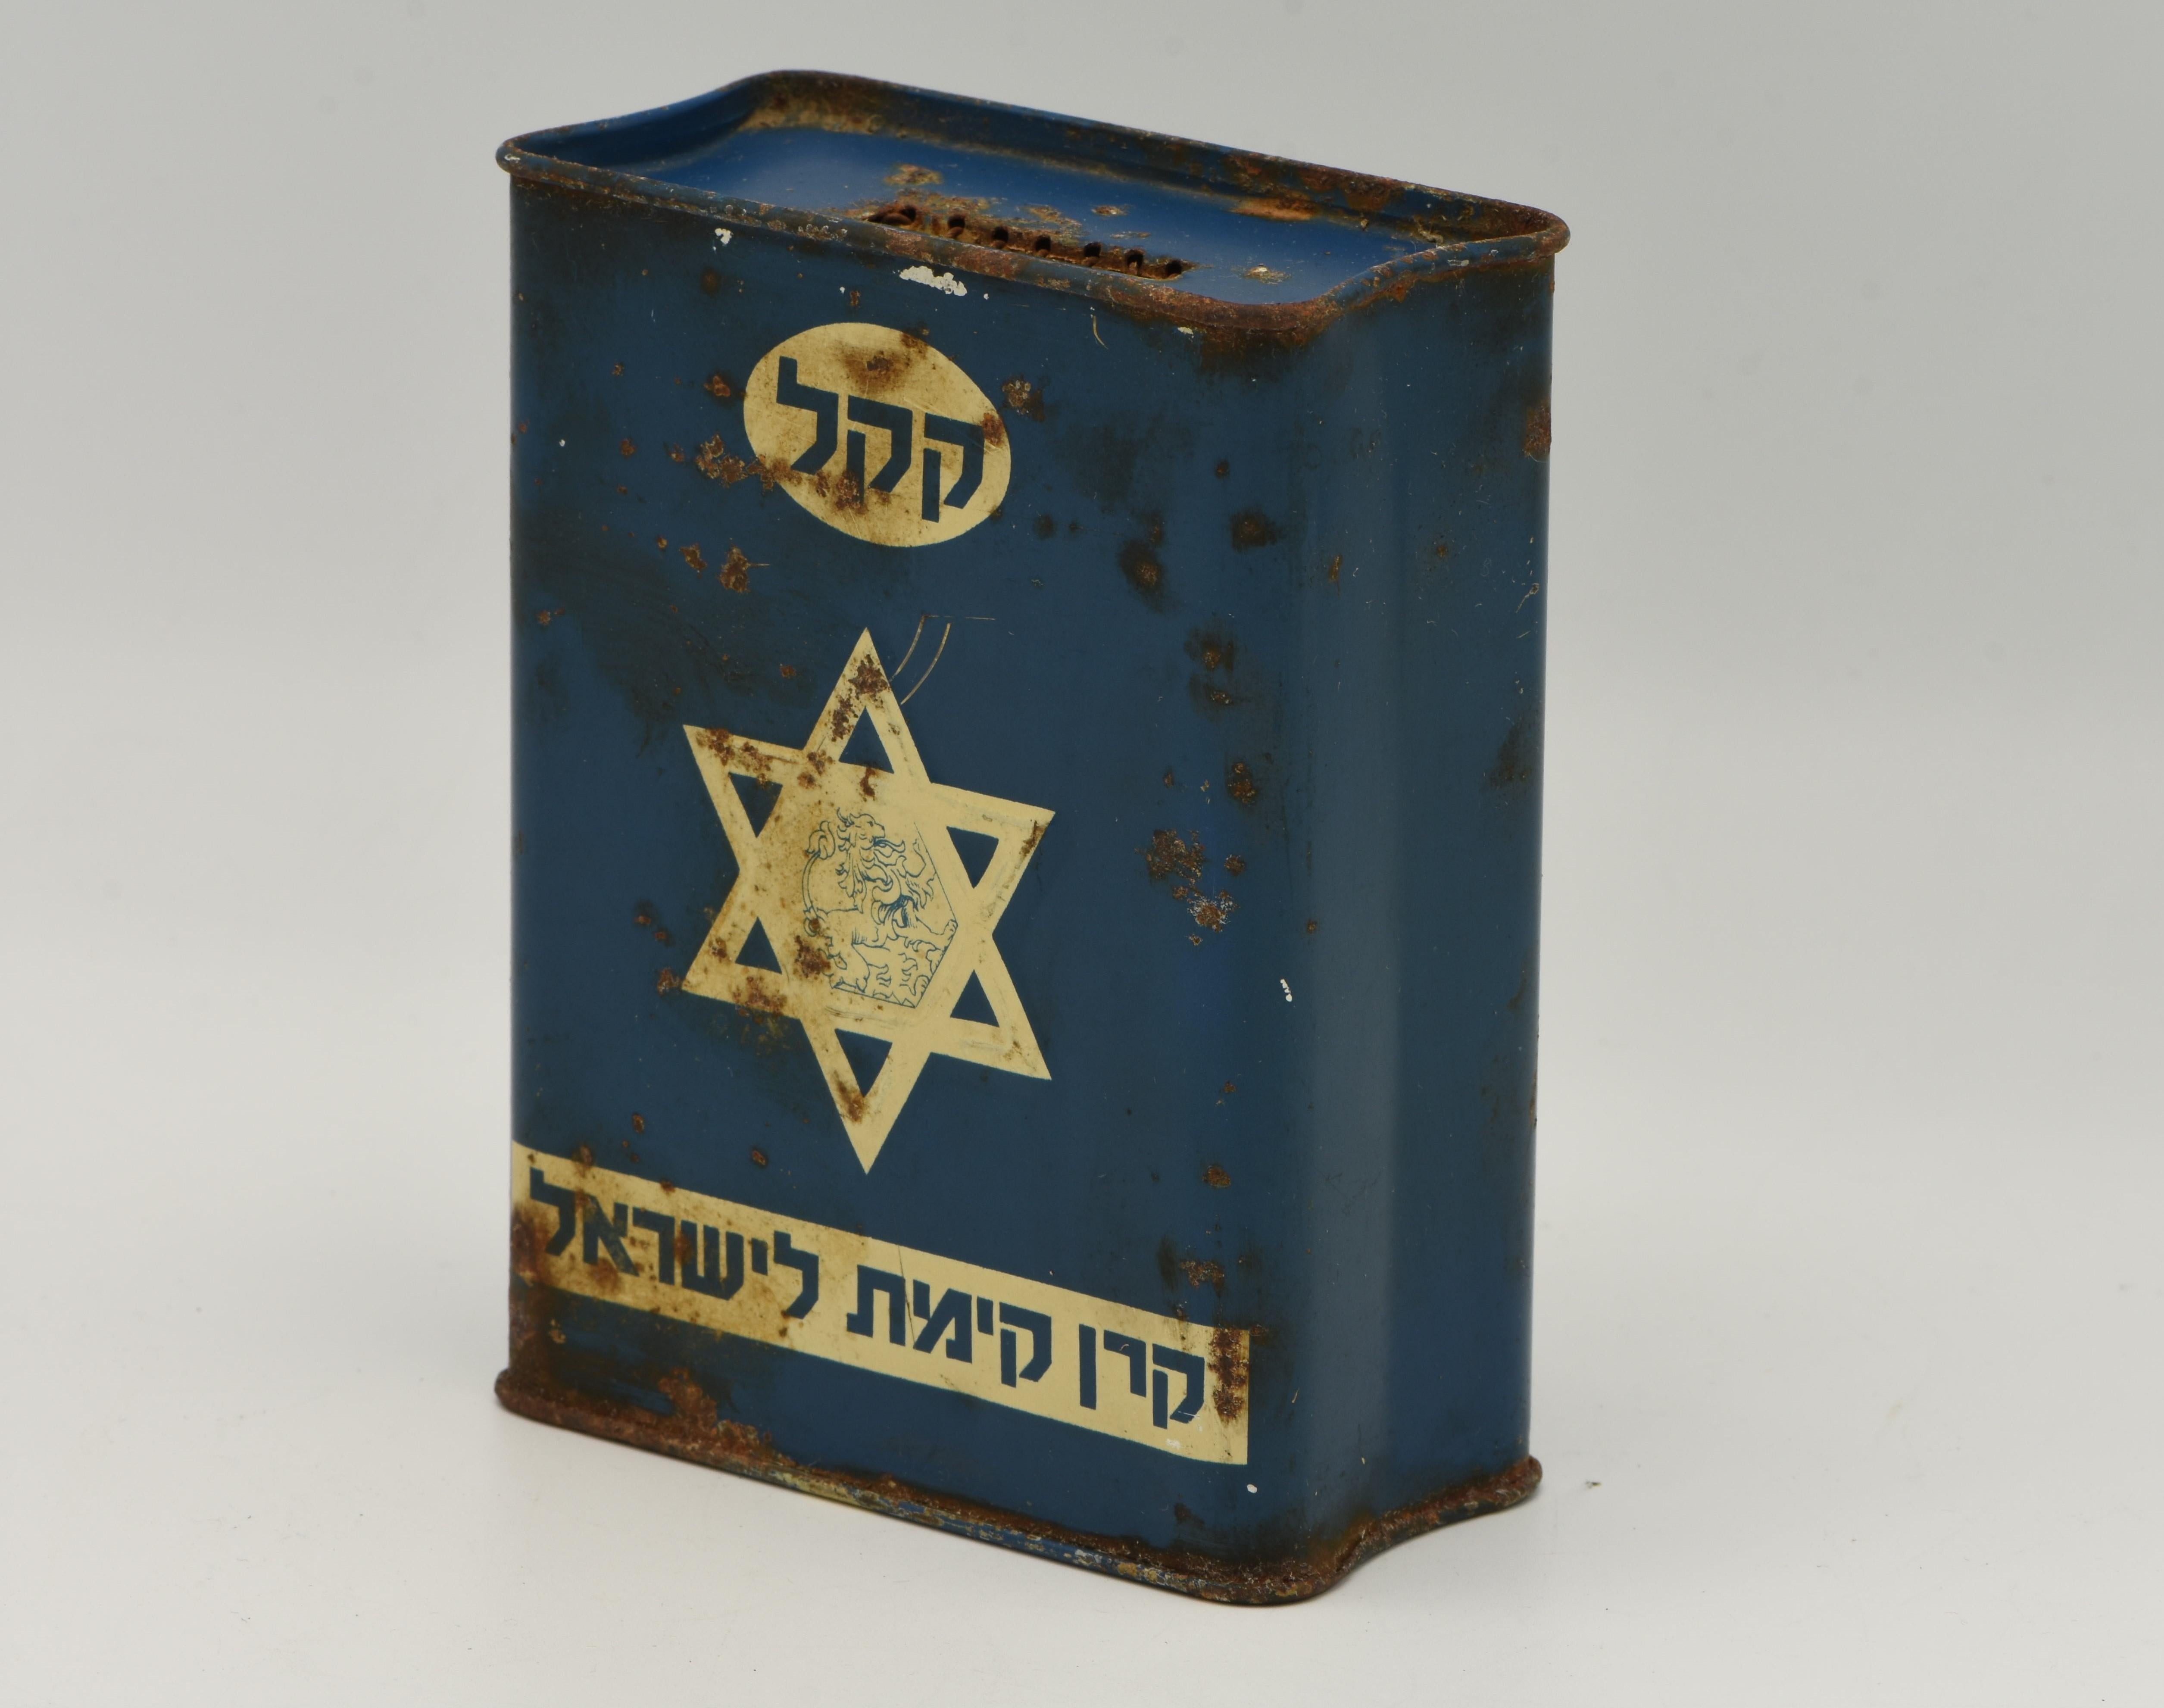 Rare JNF/KKL tin charity container, Germany, circa 1910. 
The front is embossed with Star of David with central lion motif. Further decorated with KKL insignia in Hebrew and full name of Keren Kayemet Leyisrael on front. The back is decorated with